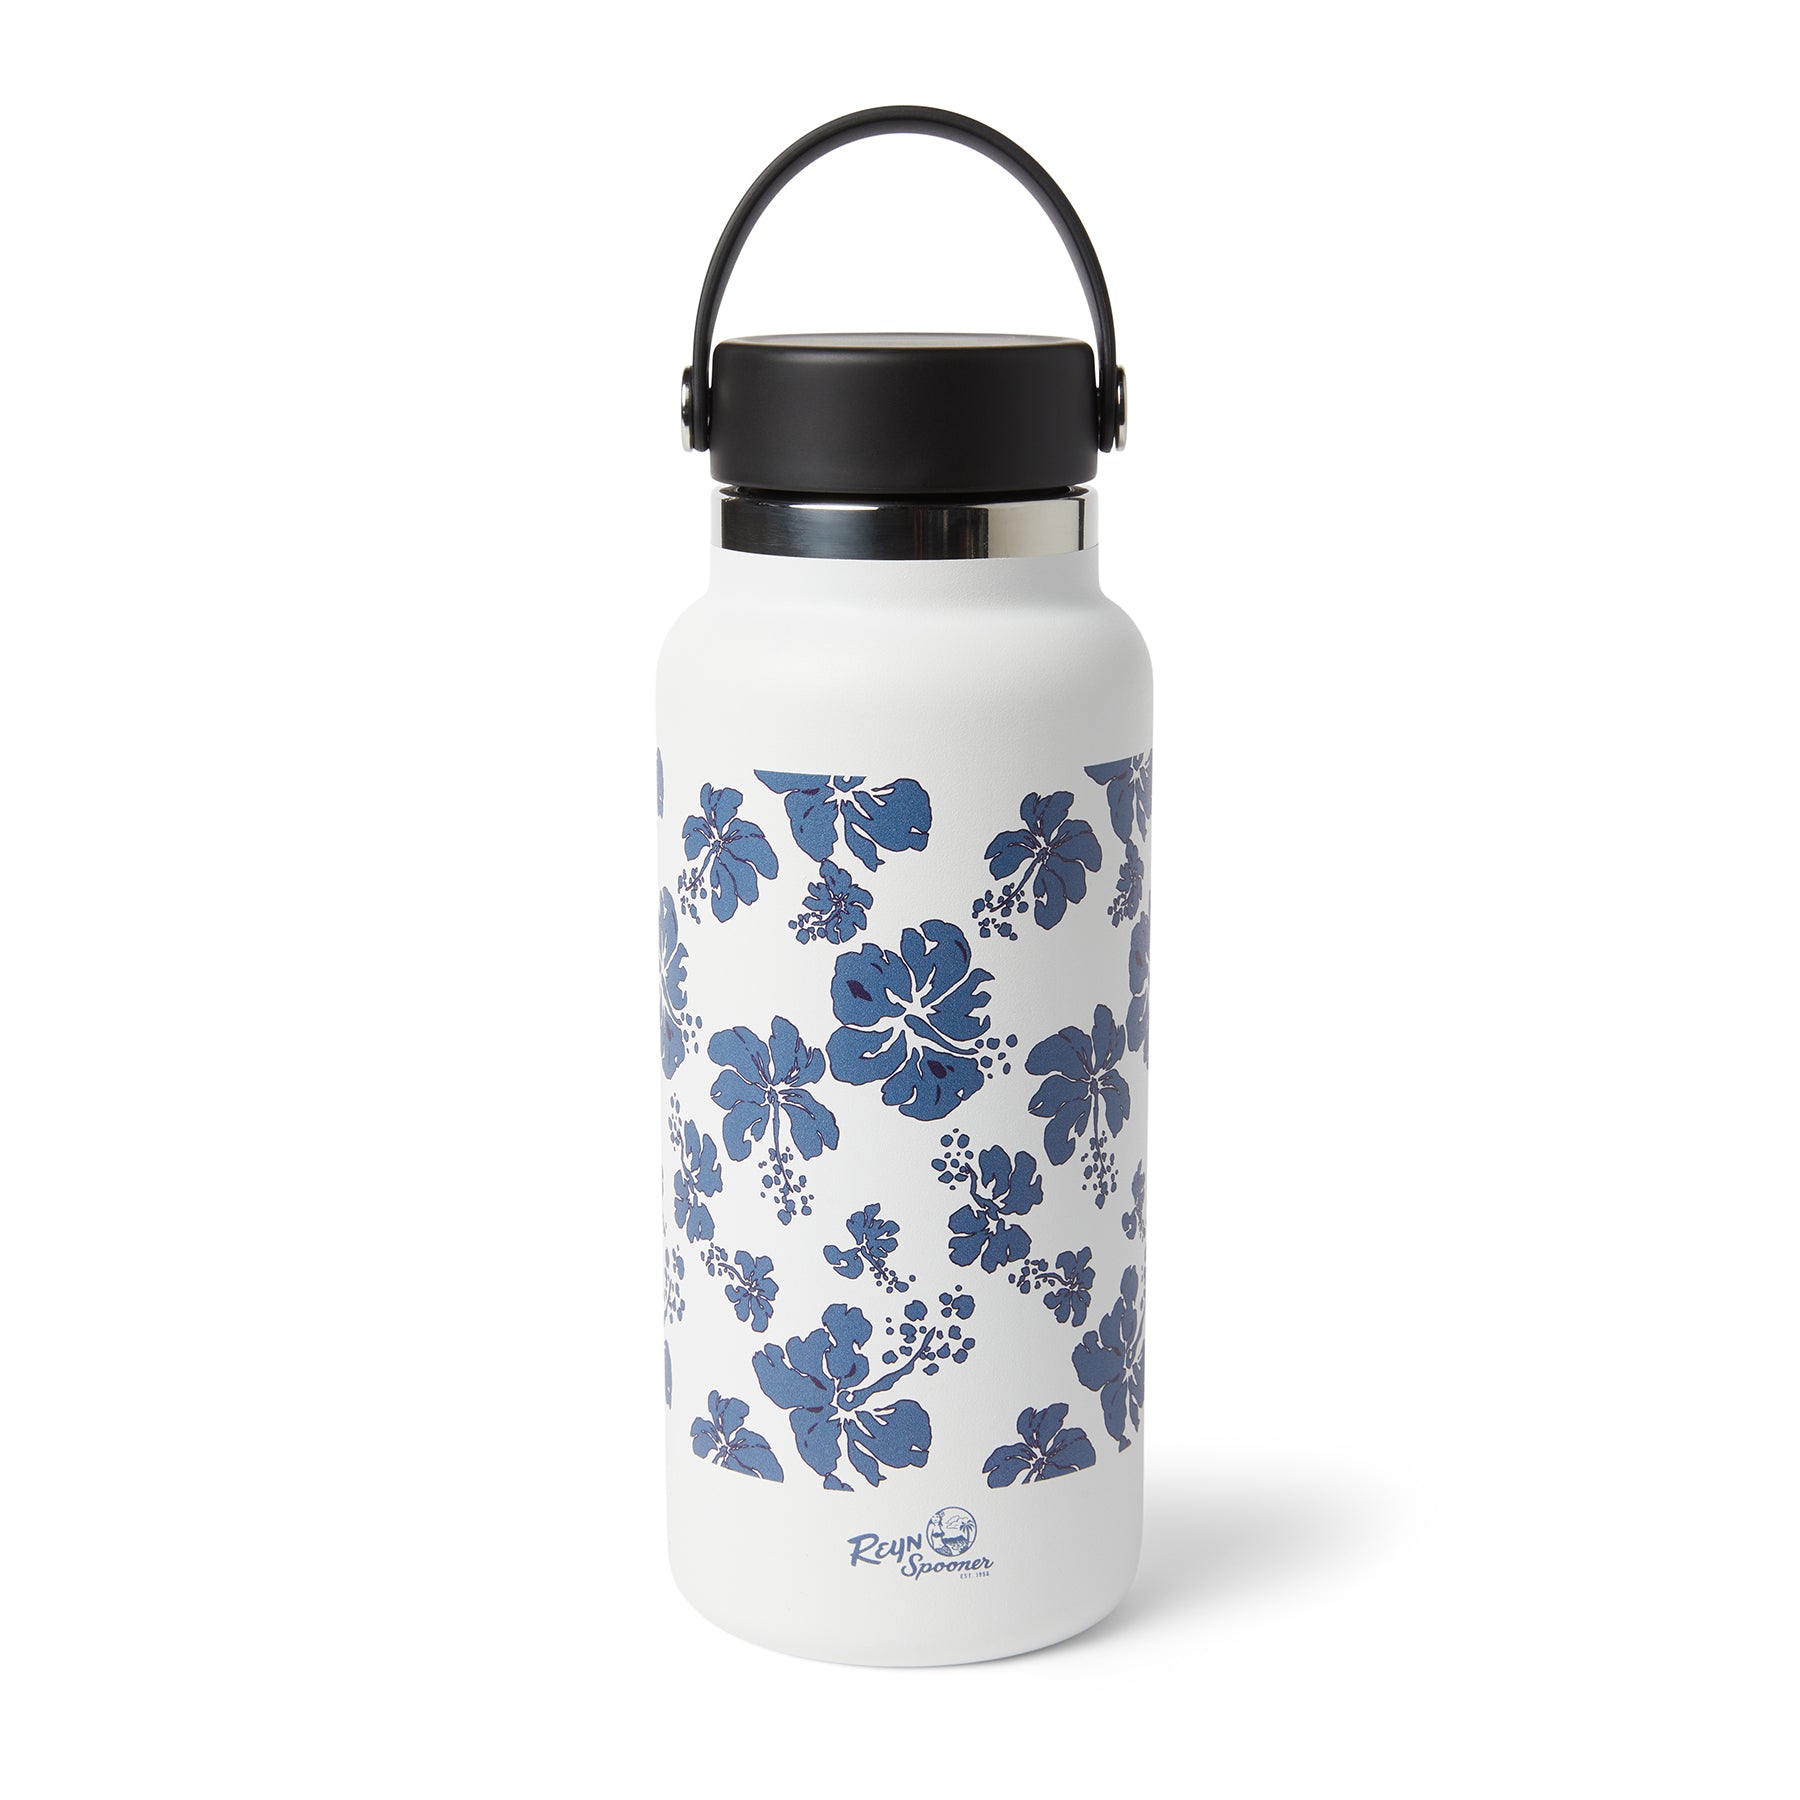 Best Hydro Flask deals: Save up to 35% on water bottles